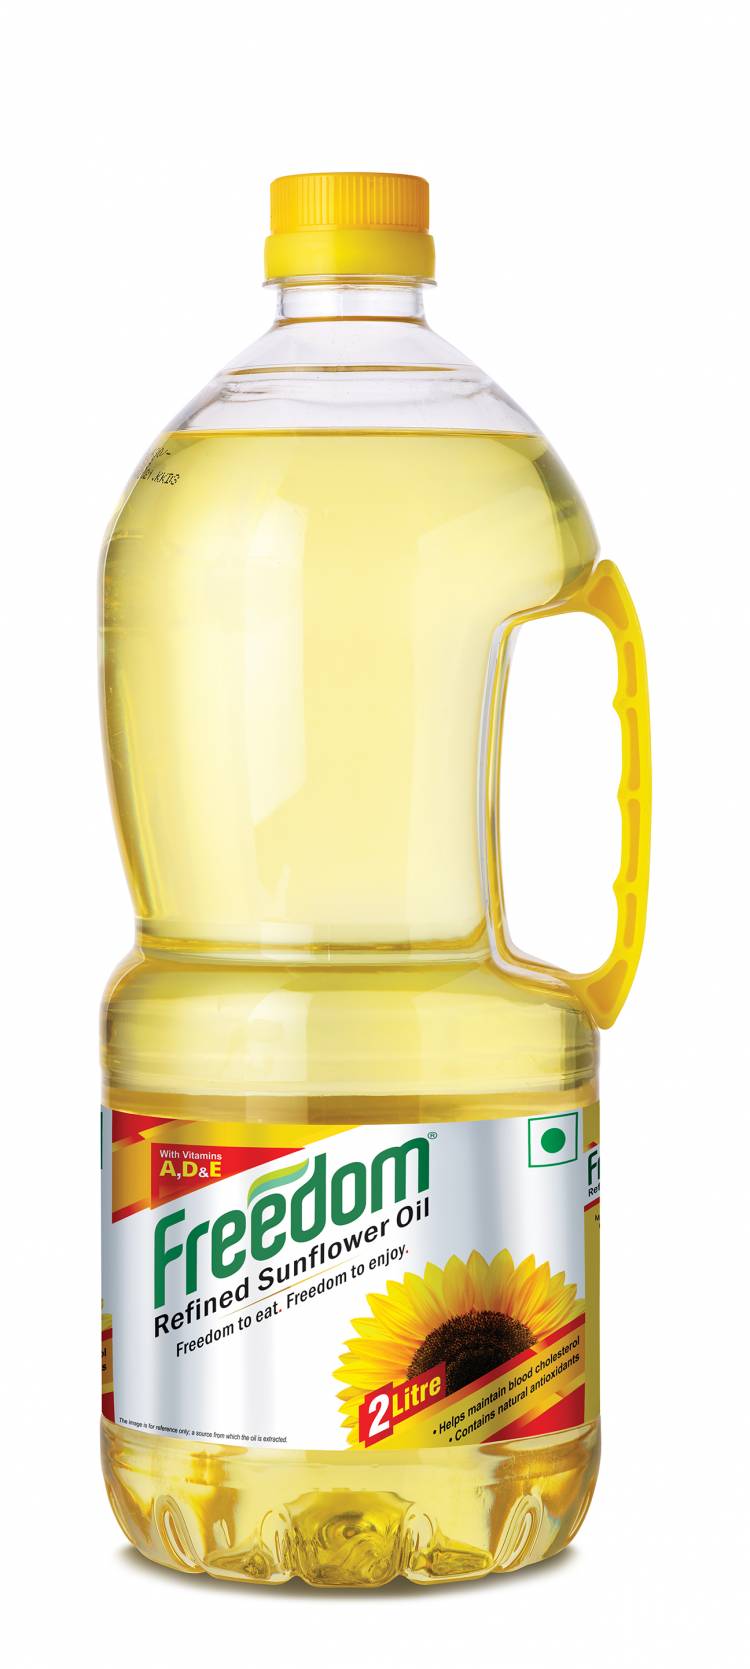 Gemini Edibles & Fats India Pvt Ltd launches 2 ltr jar of Freedom Refined Sunflower Oil